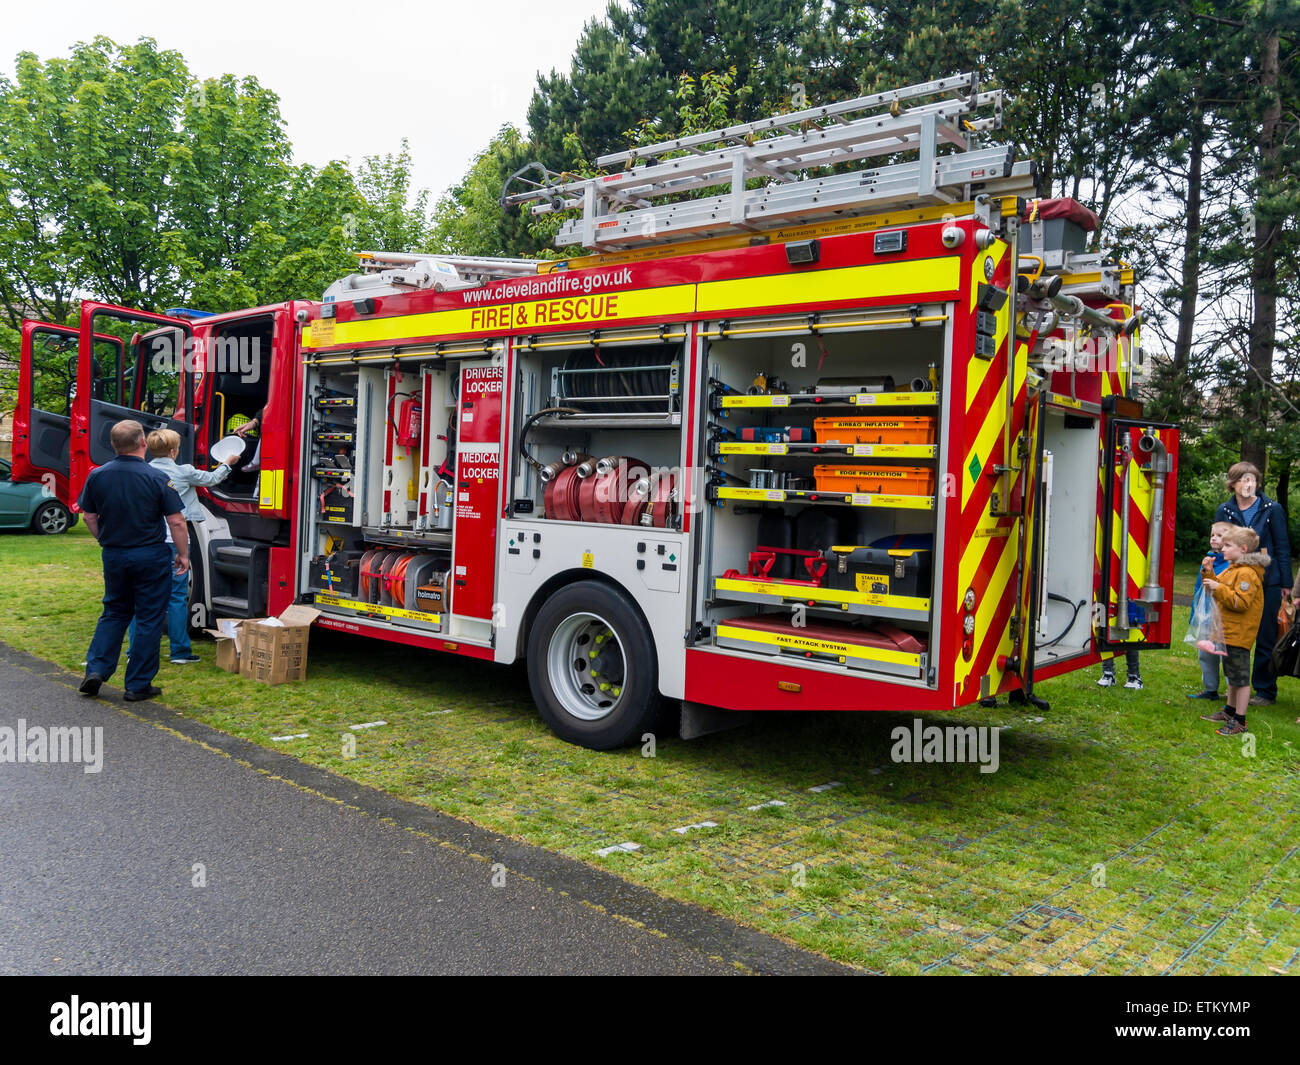 Family Fun Day fund raising event at Marske Hall home for the disabled, a Cleveland Fire Brigade Appliance on show Stock Photo